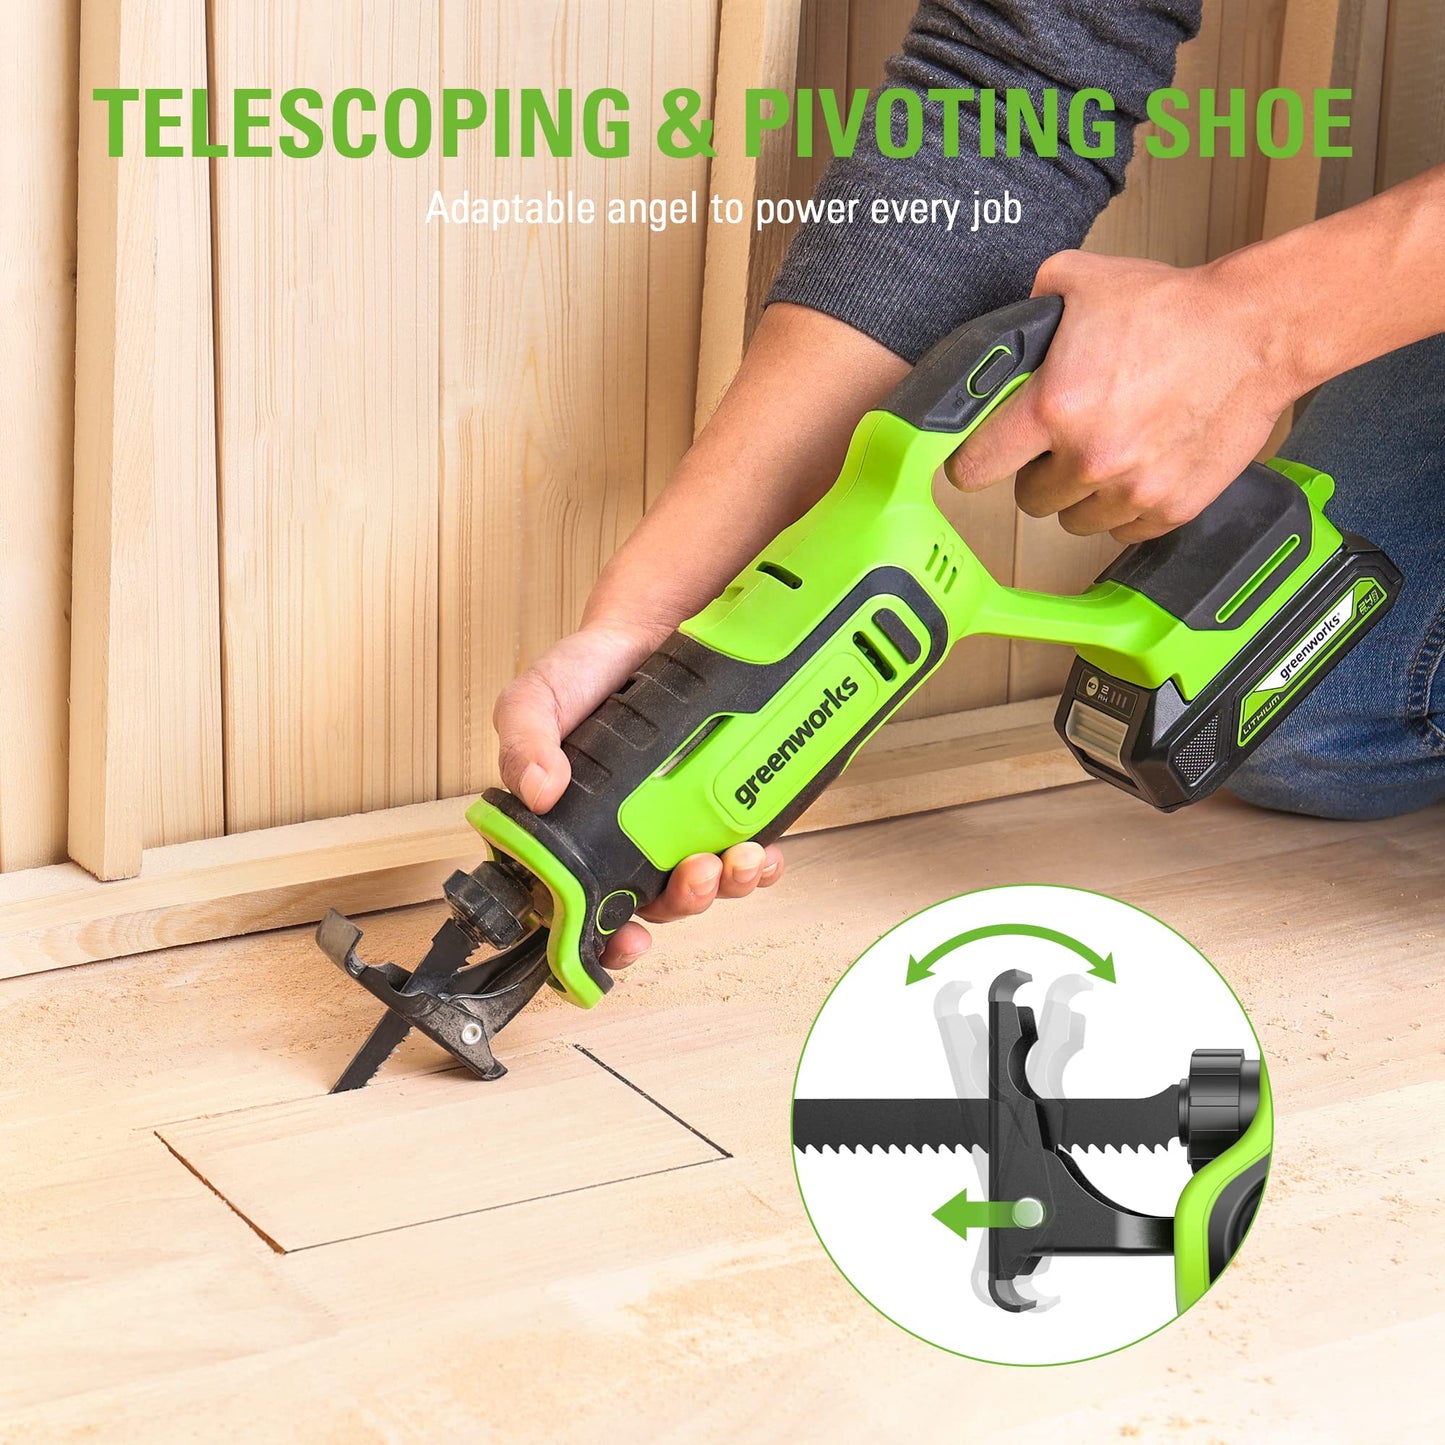 Greenworks 24V Brushless 1" Compact Reciprocating Saw (3,000 SPM), 2.0Ah Battery and Compact Charger Included